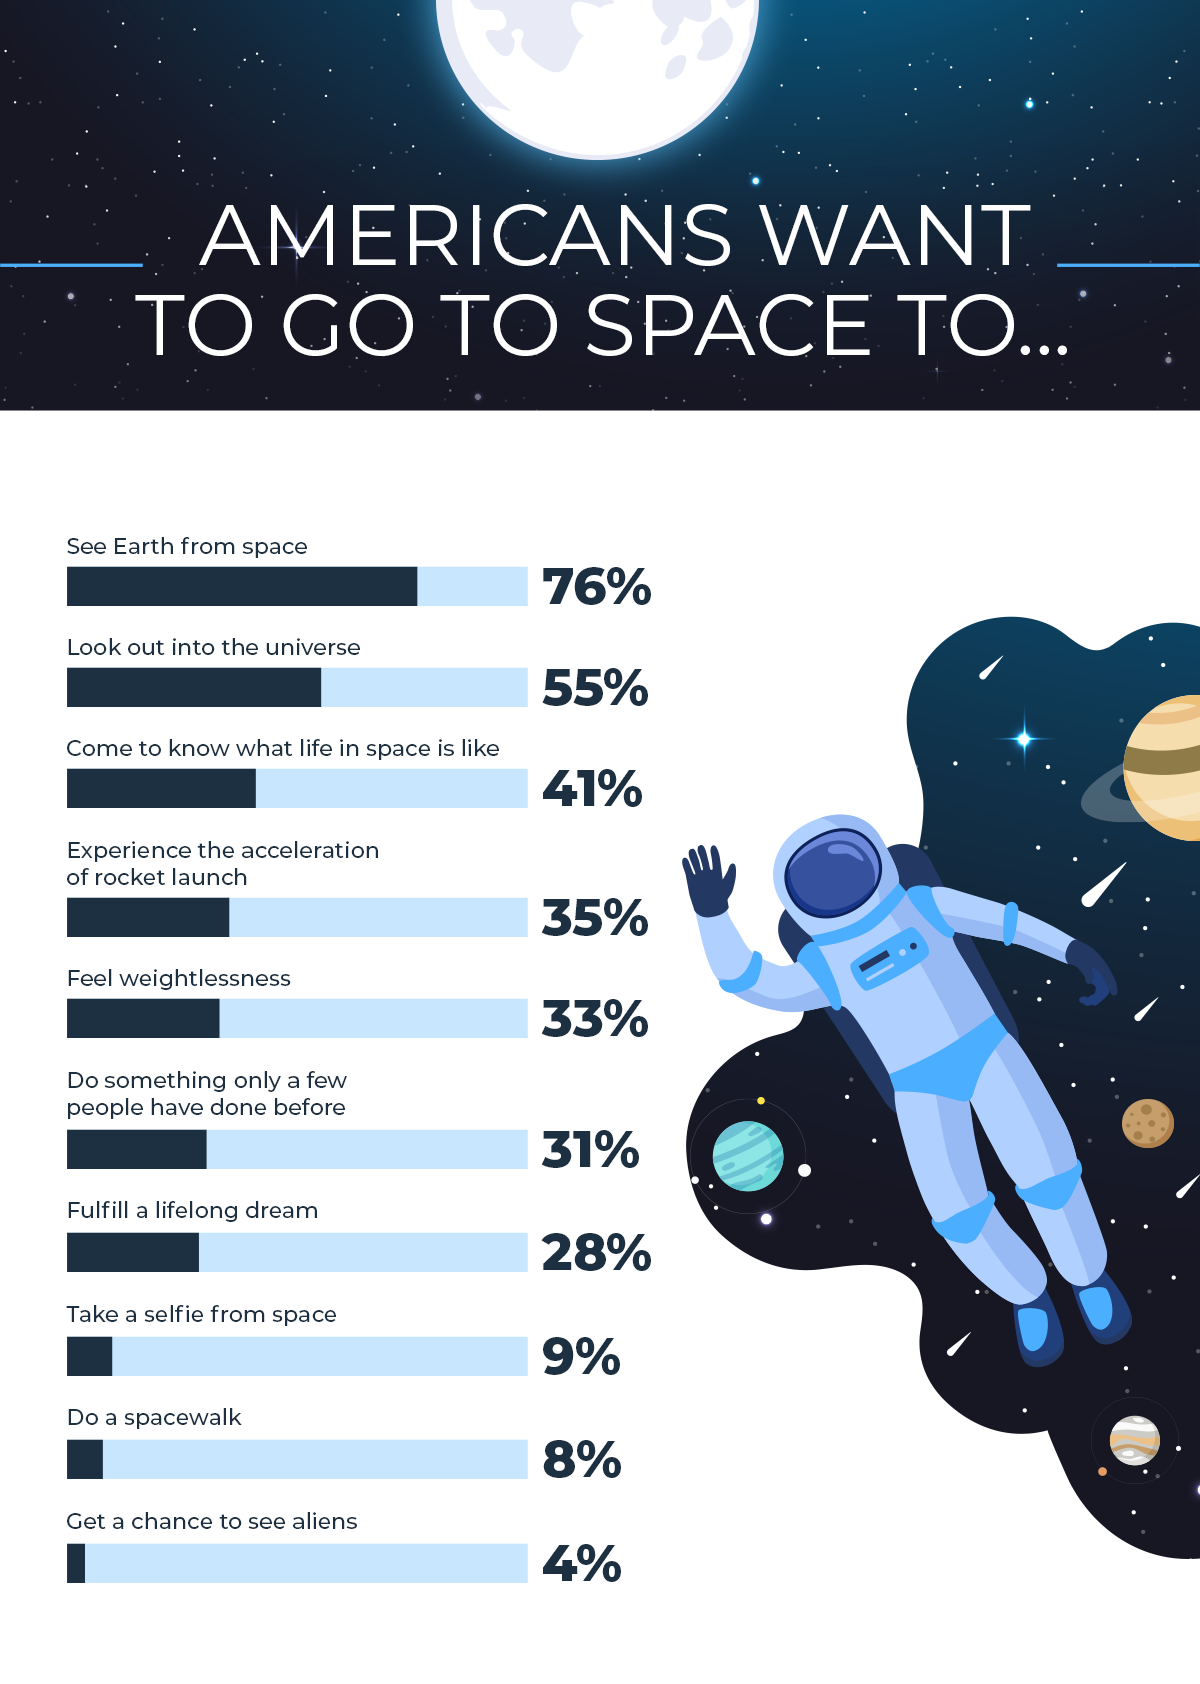 Why Americans Want to Go to Space